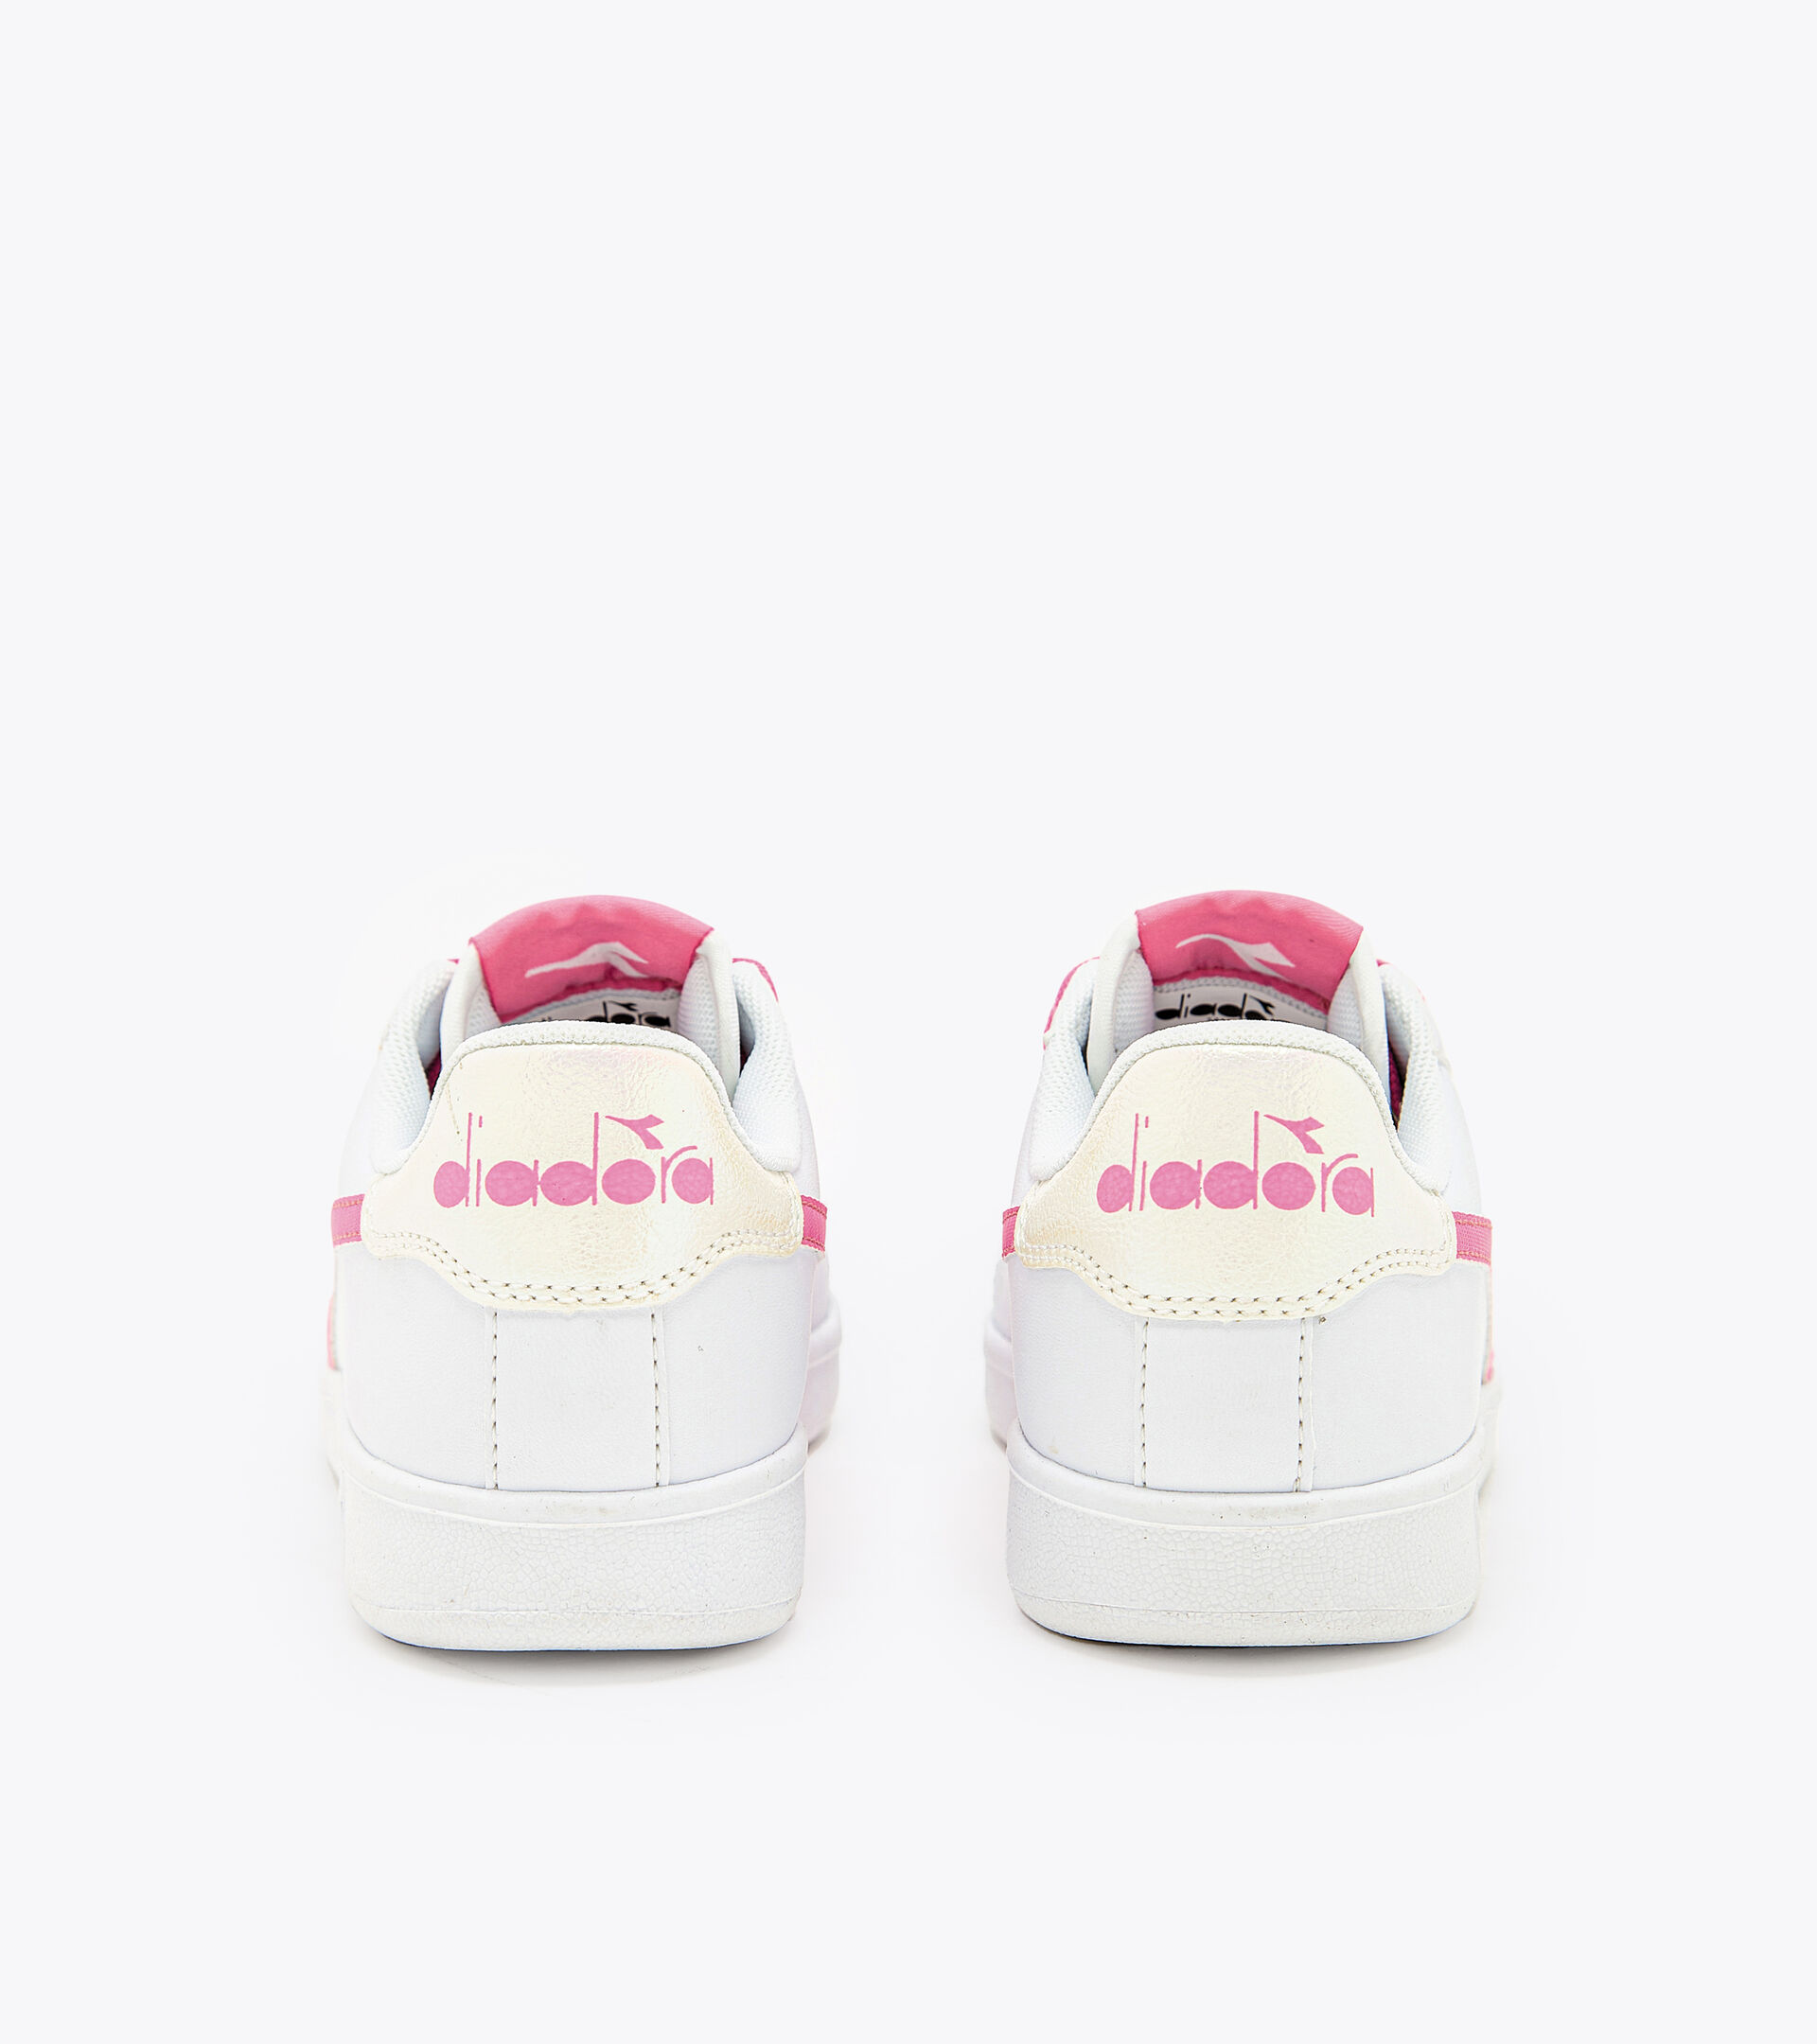 Puma Pink Sparkly Sneakers Size 4c Infant